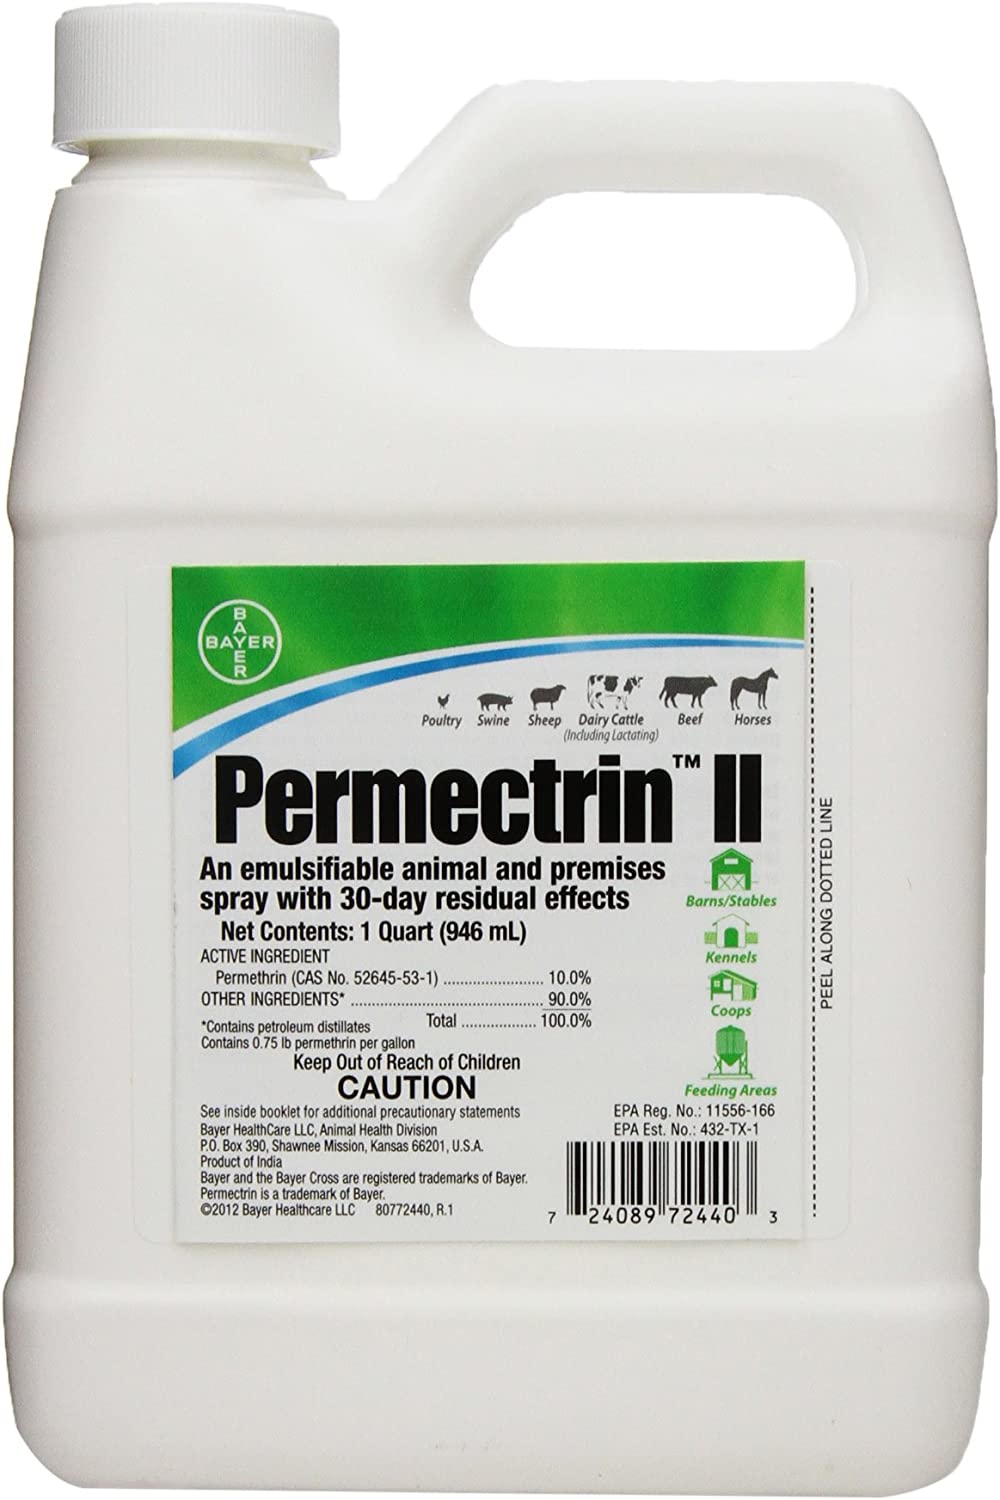 Bayer Permectrin II Insecticide, 32-Ounce